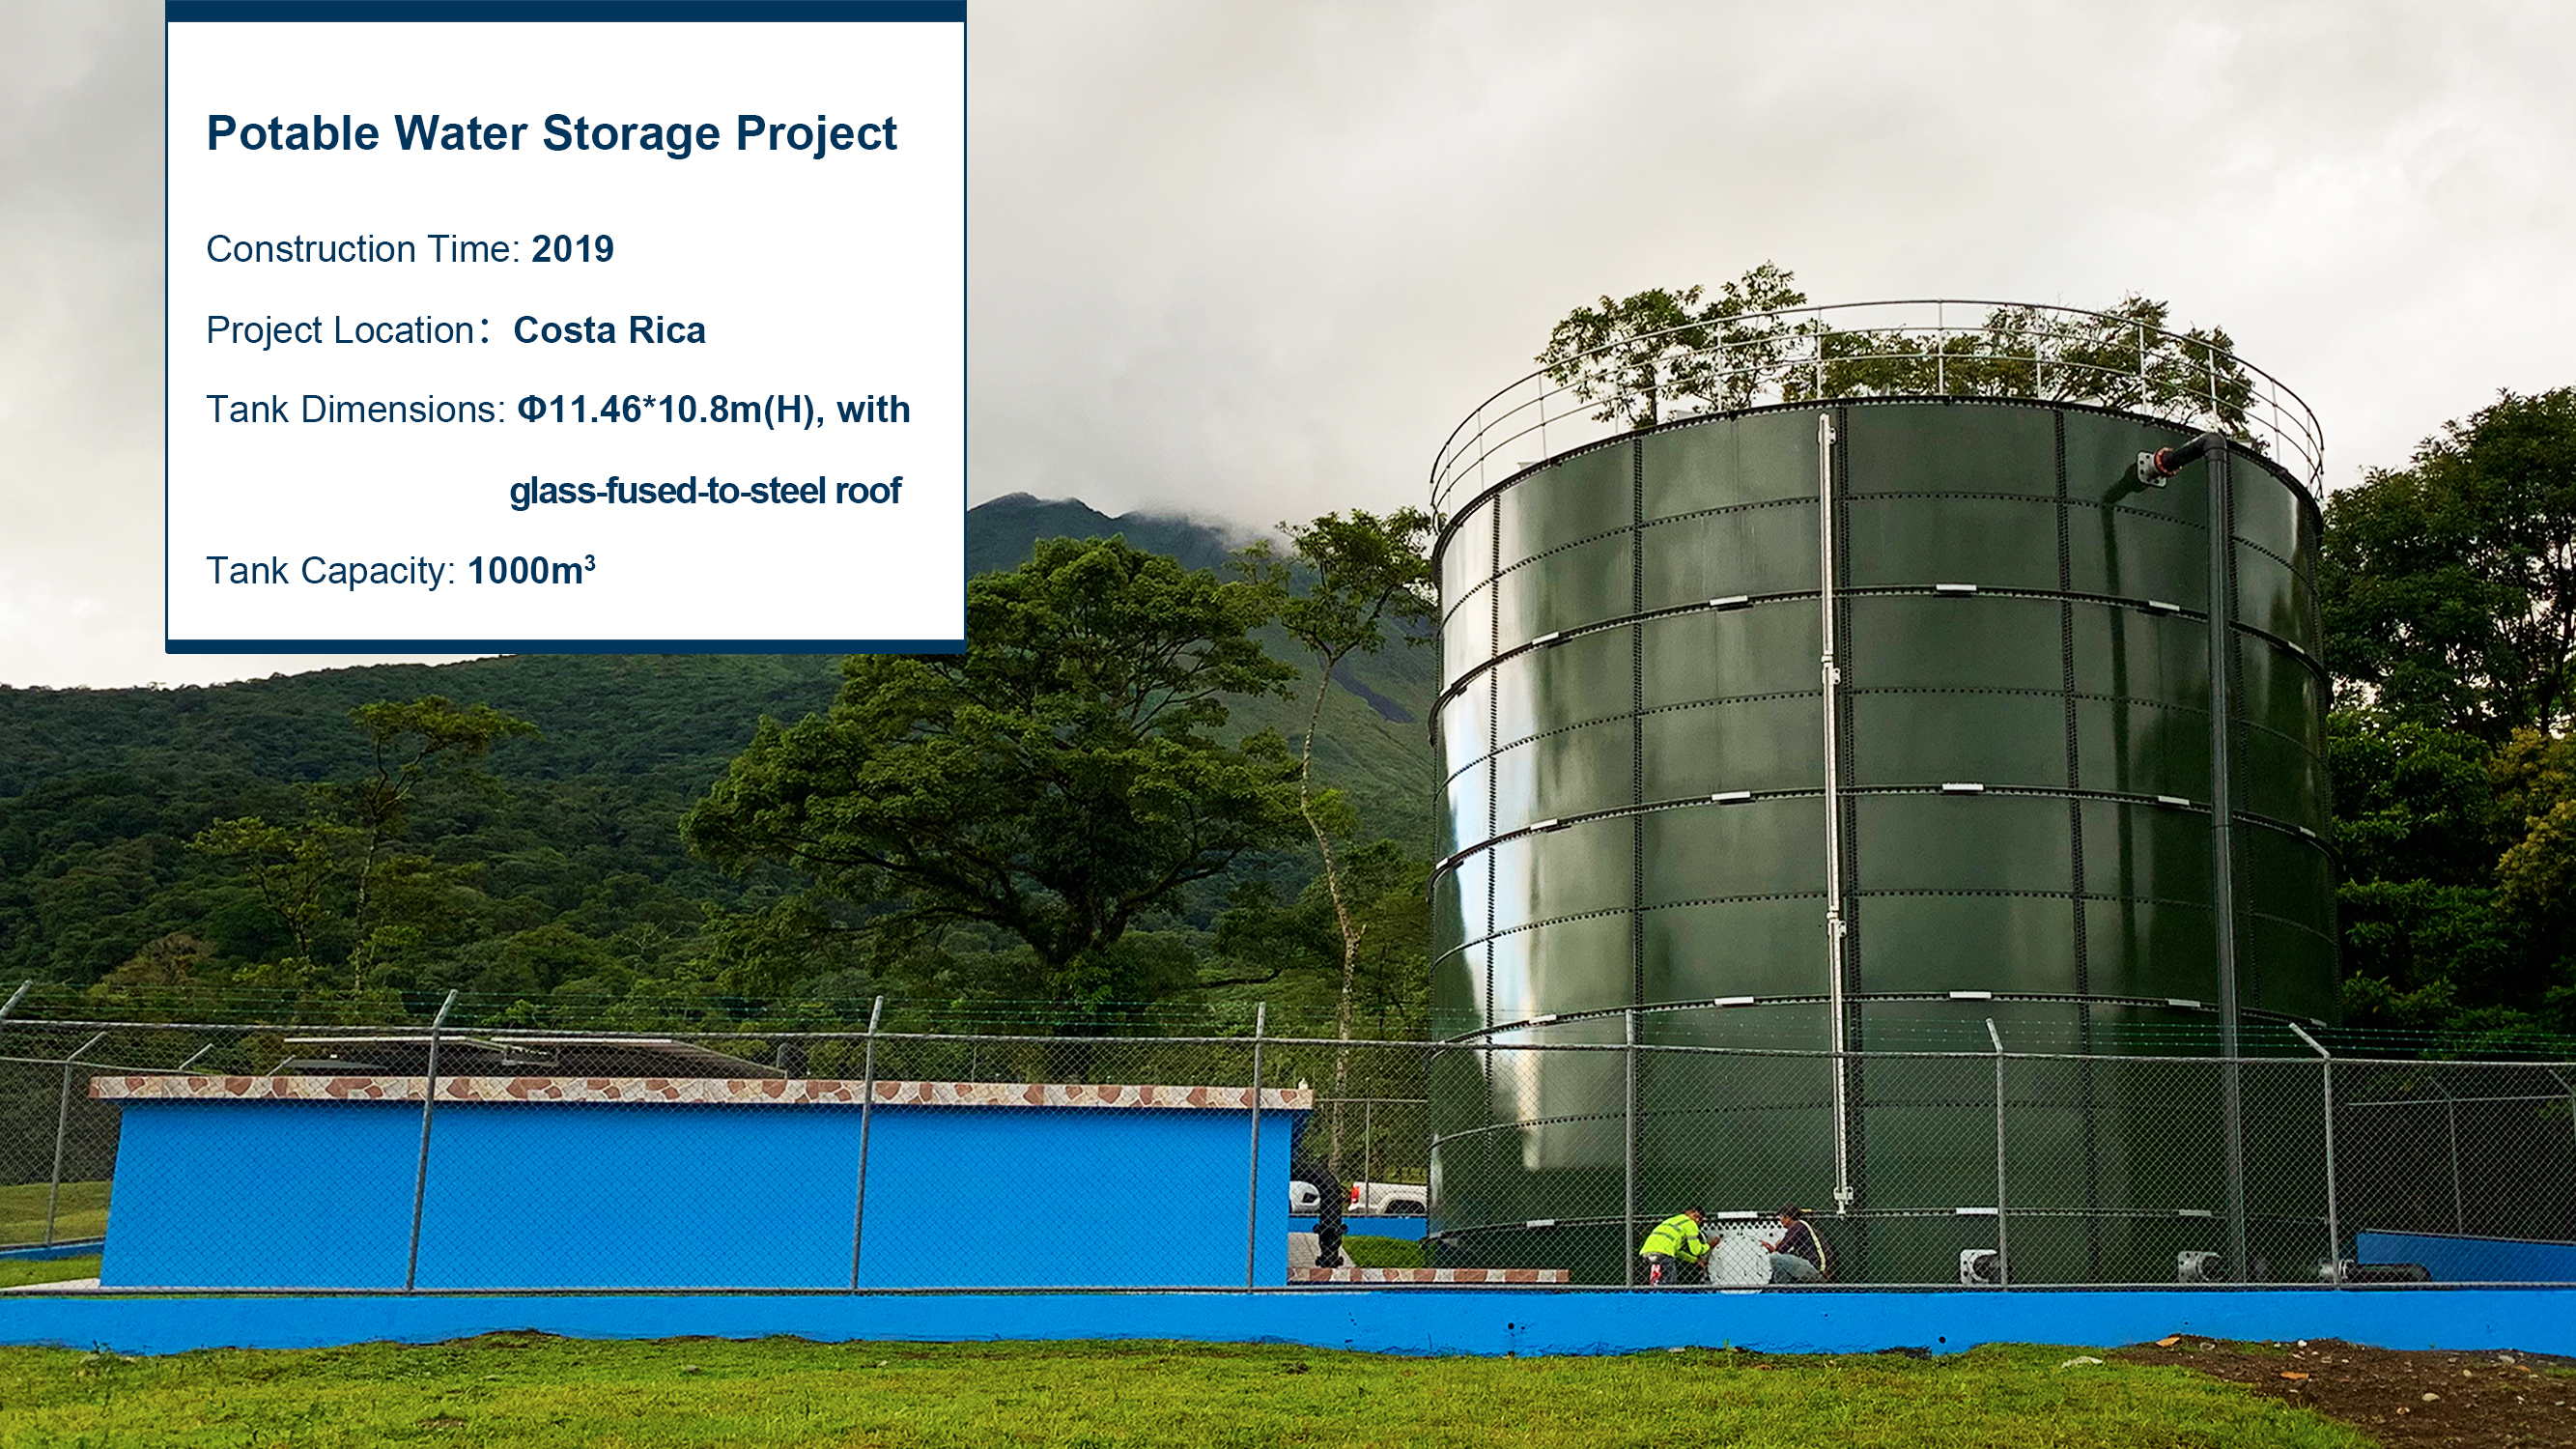 GLS Tanks. glass-lined steel. – waste to energy., biogas.